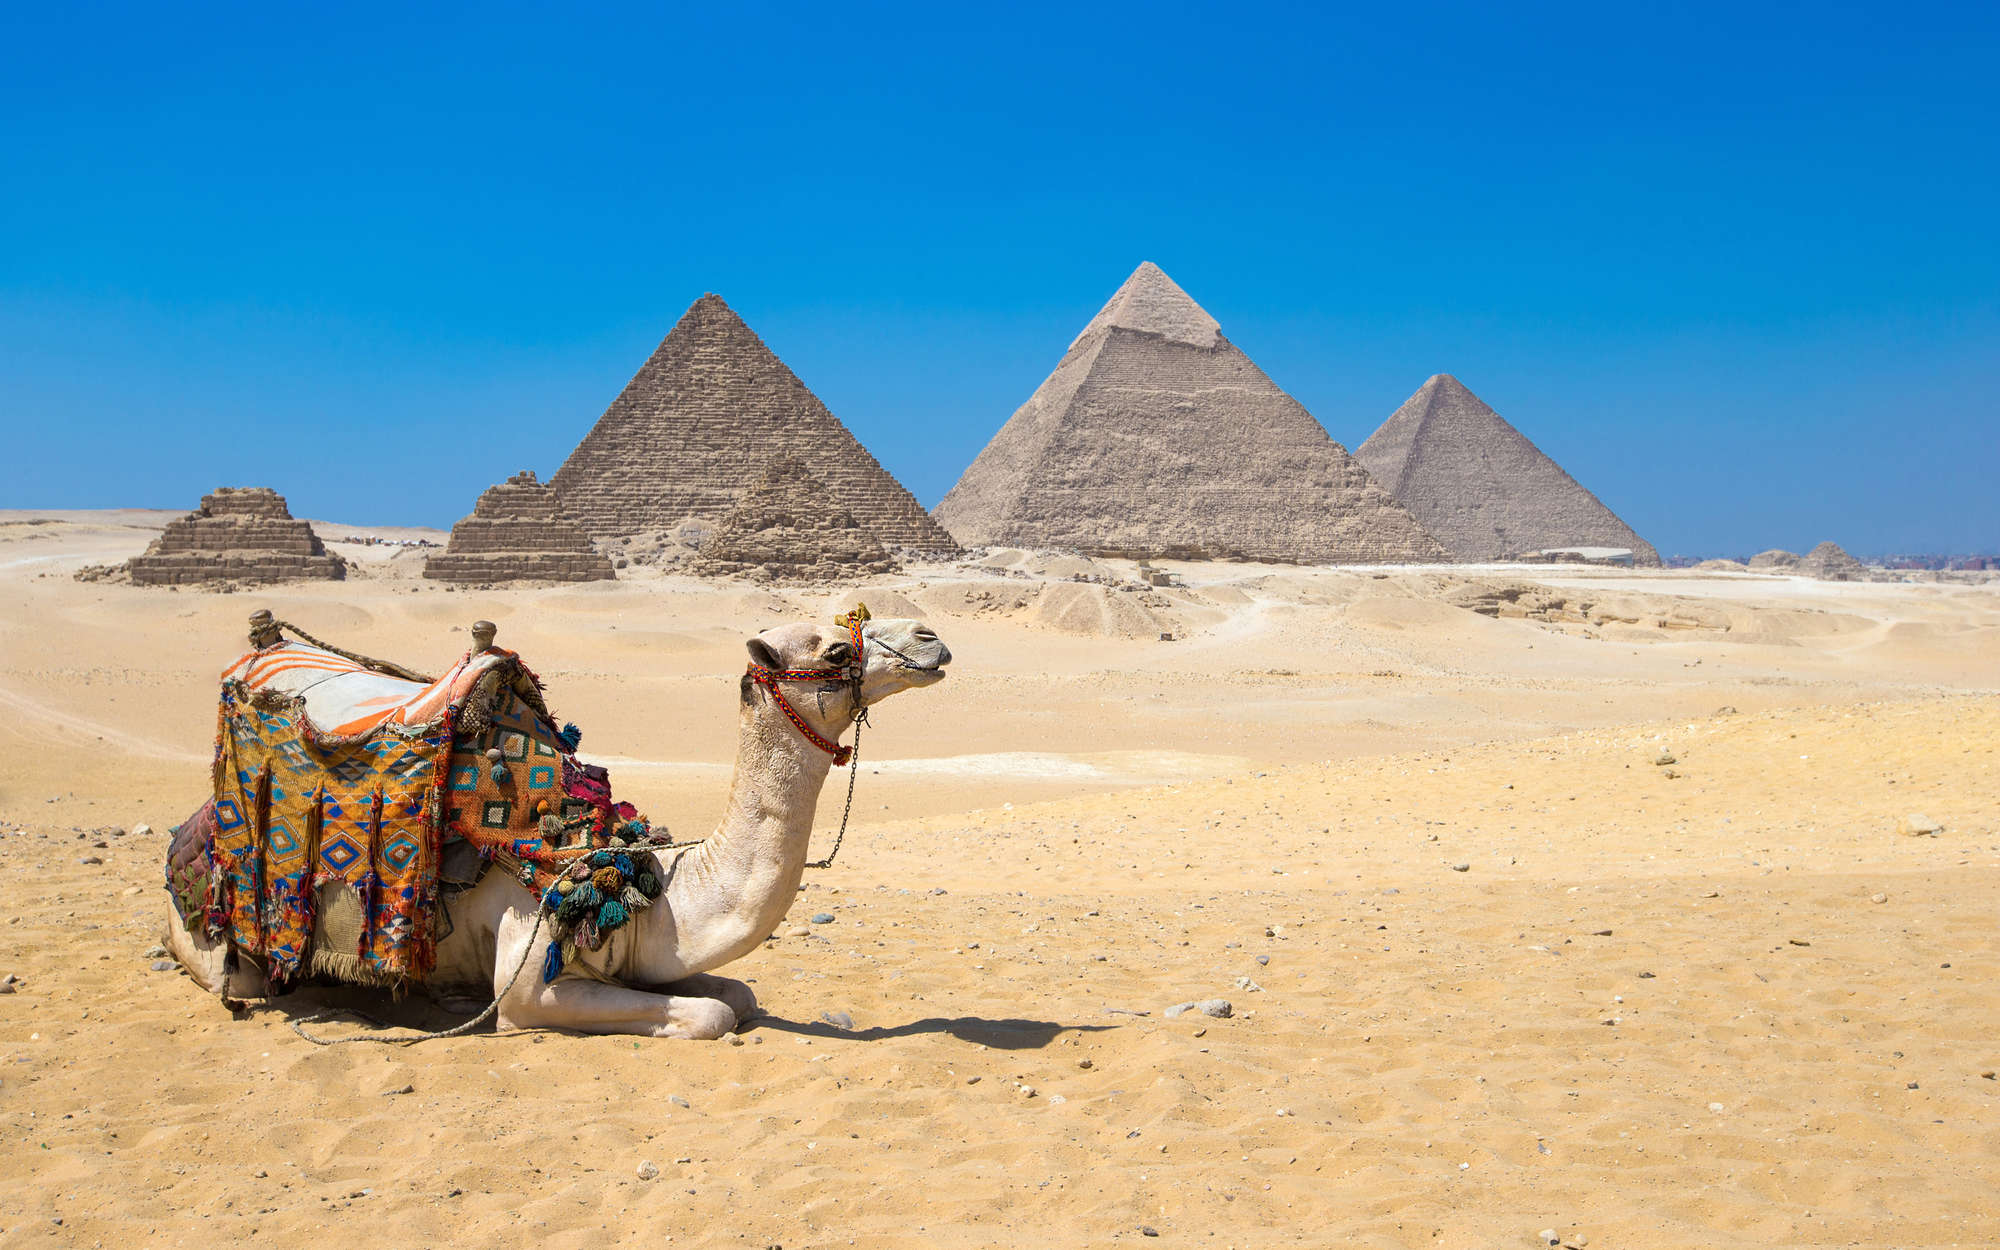             Photo wallpaper Pyramids of Giza with camel - mother-of-pearl smooth fleece
        